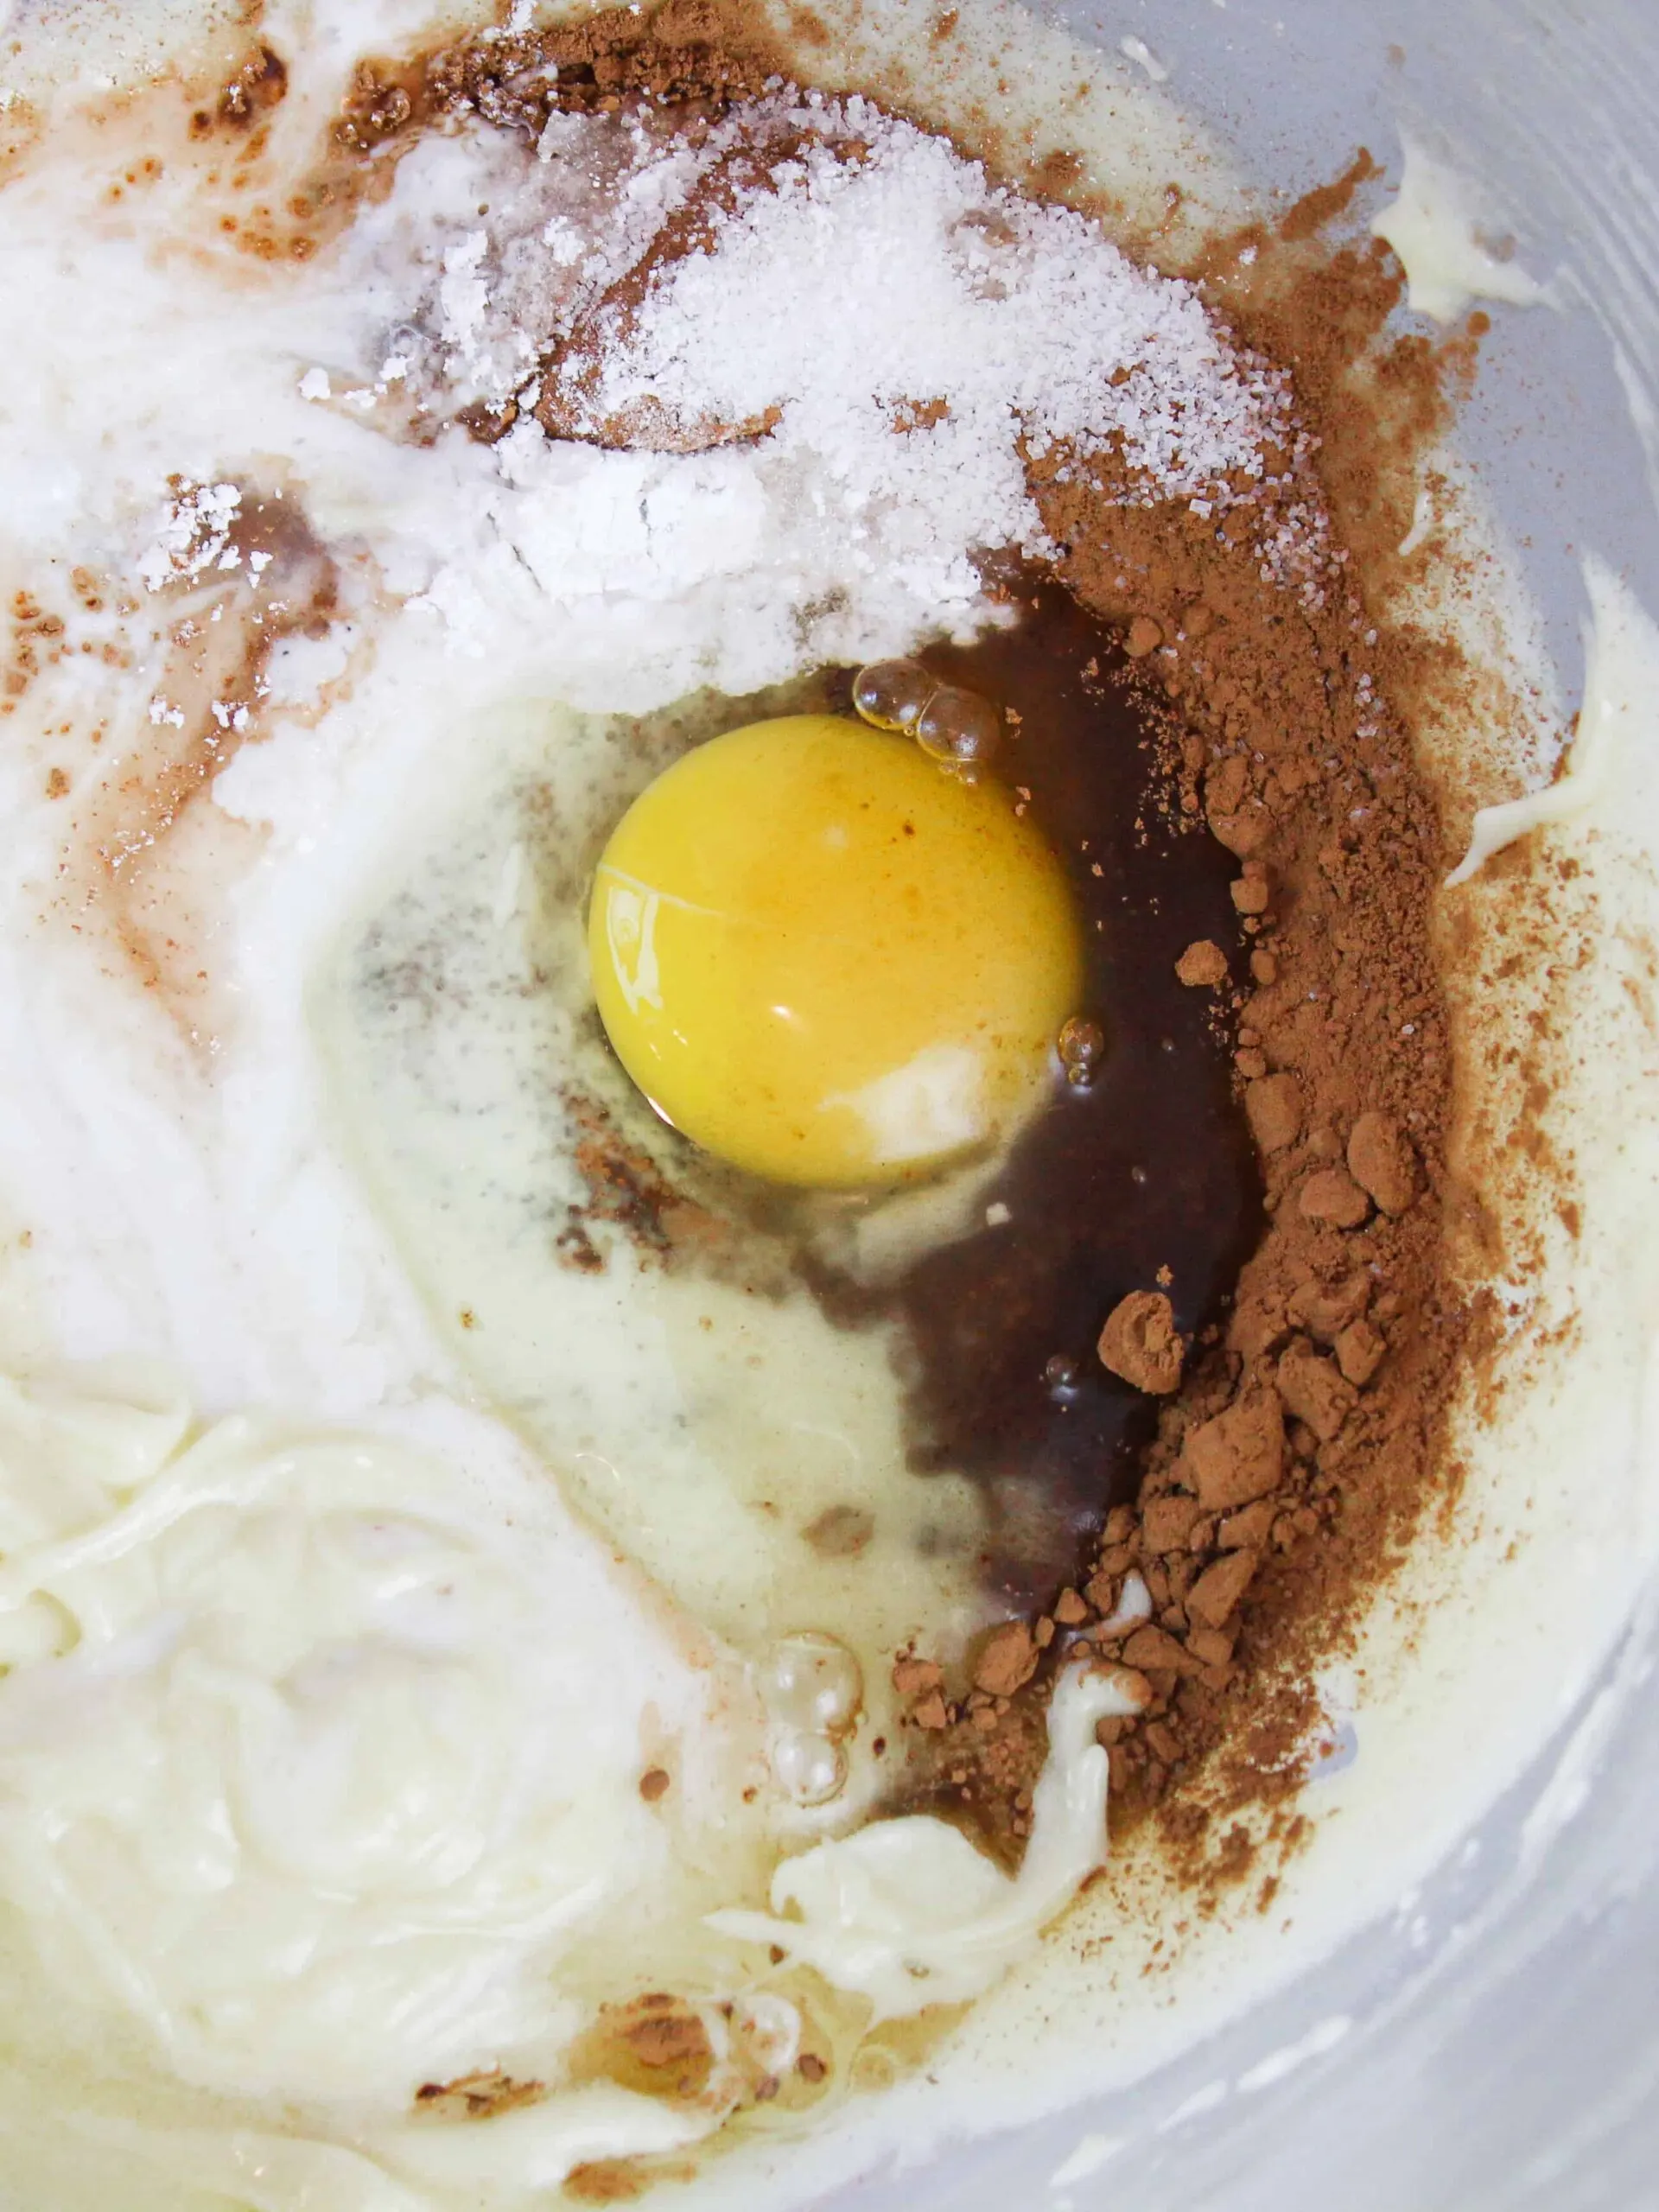 image of vanilla cake batter being turned into chocolate batter
